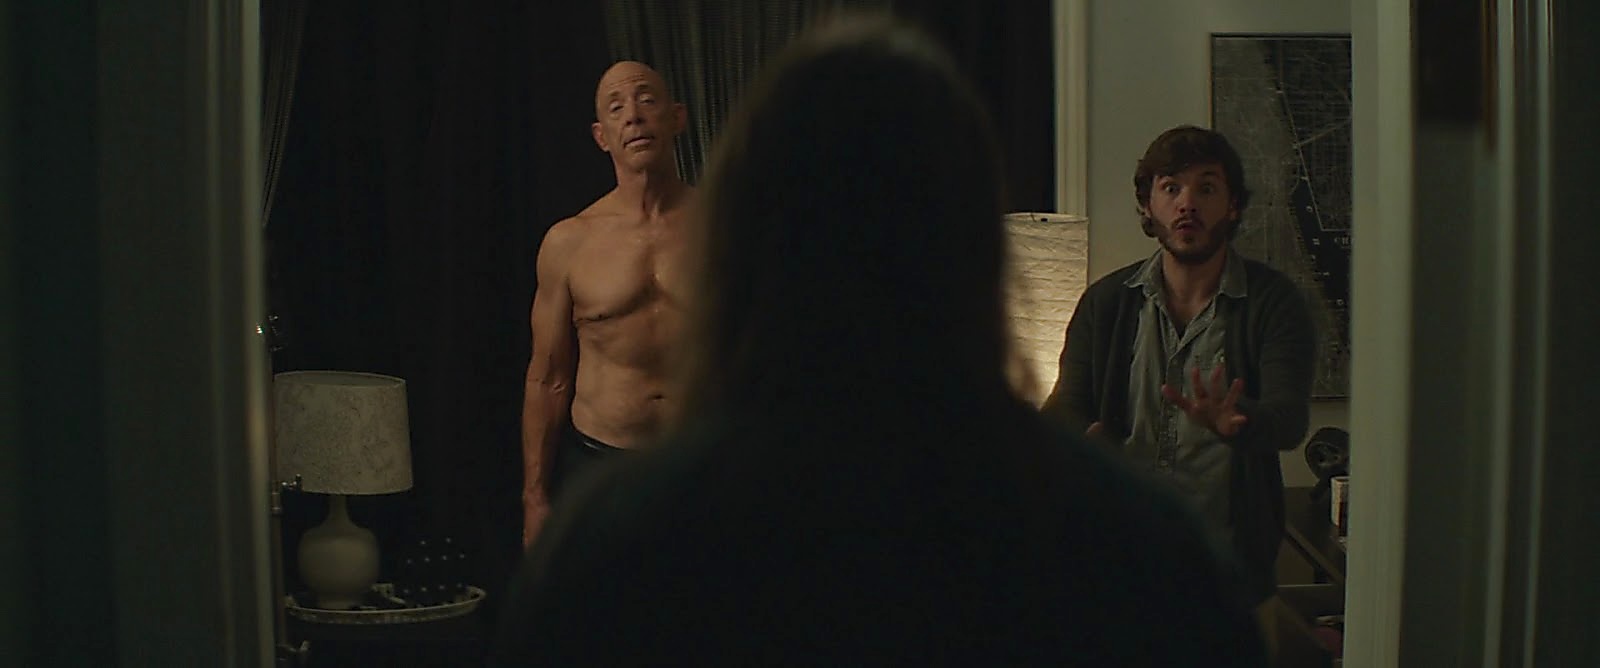 J K Simmons sexy shirtless scene March 25, 2017, 1pm